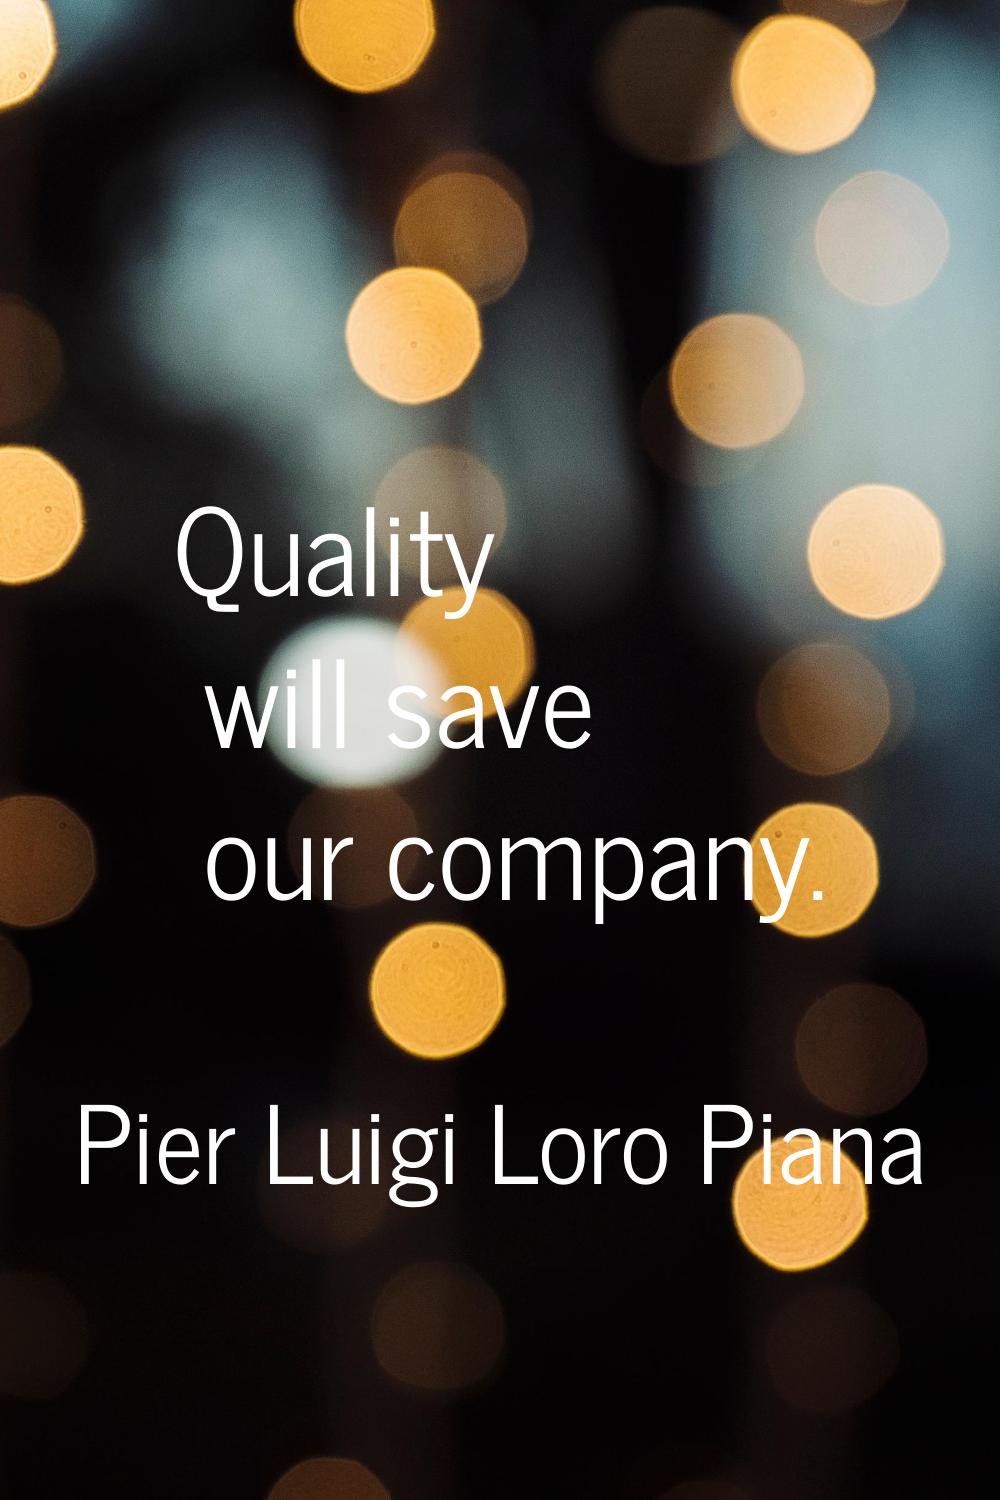 Quality will save our company.